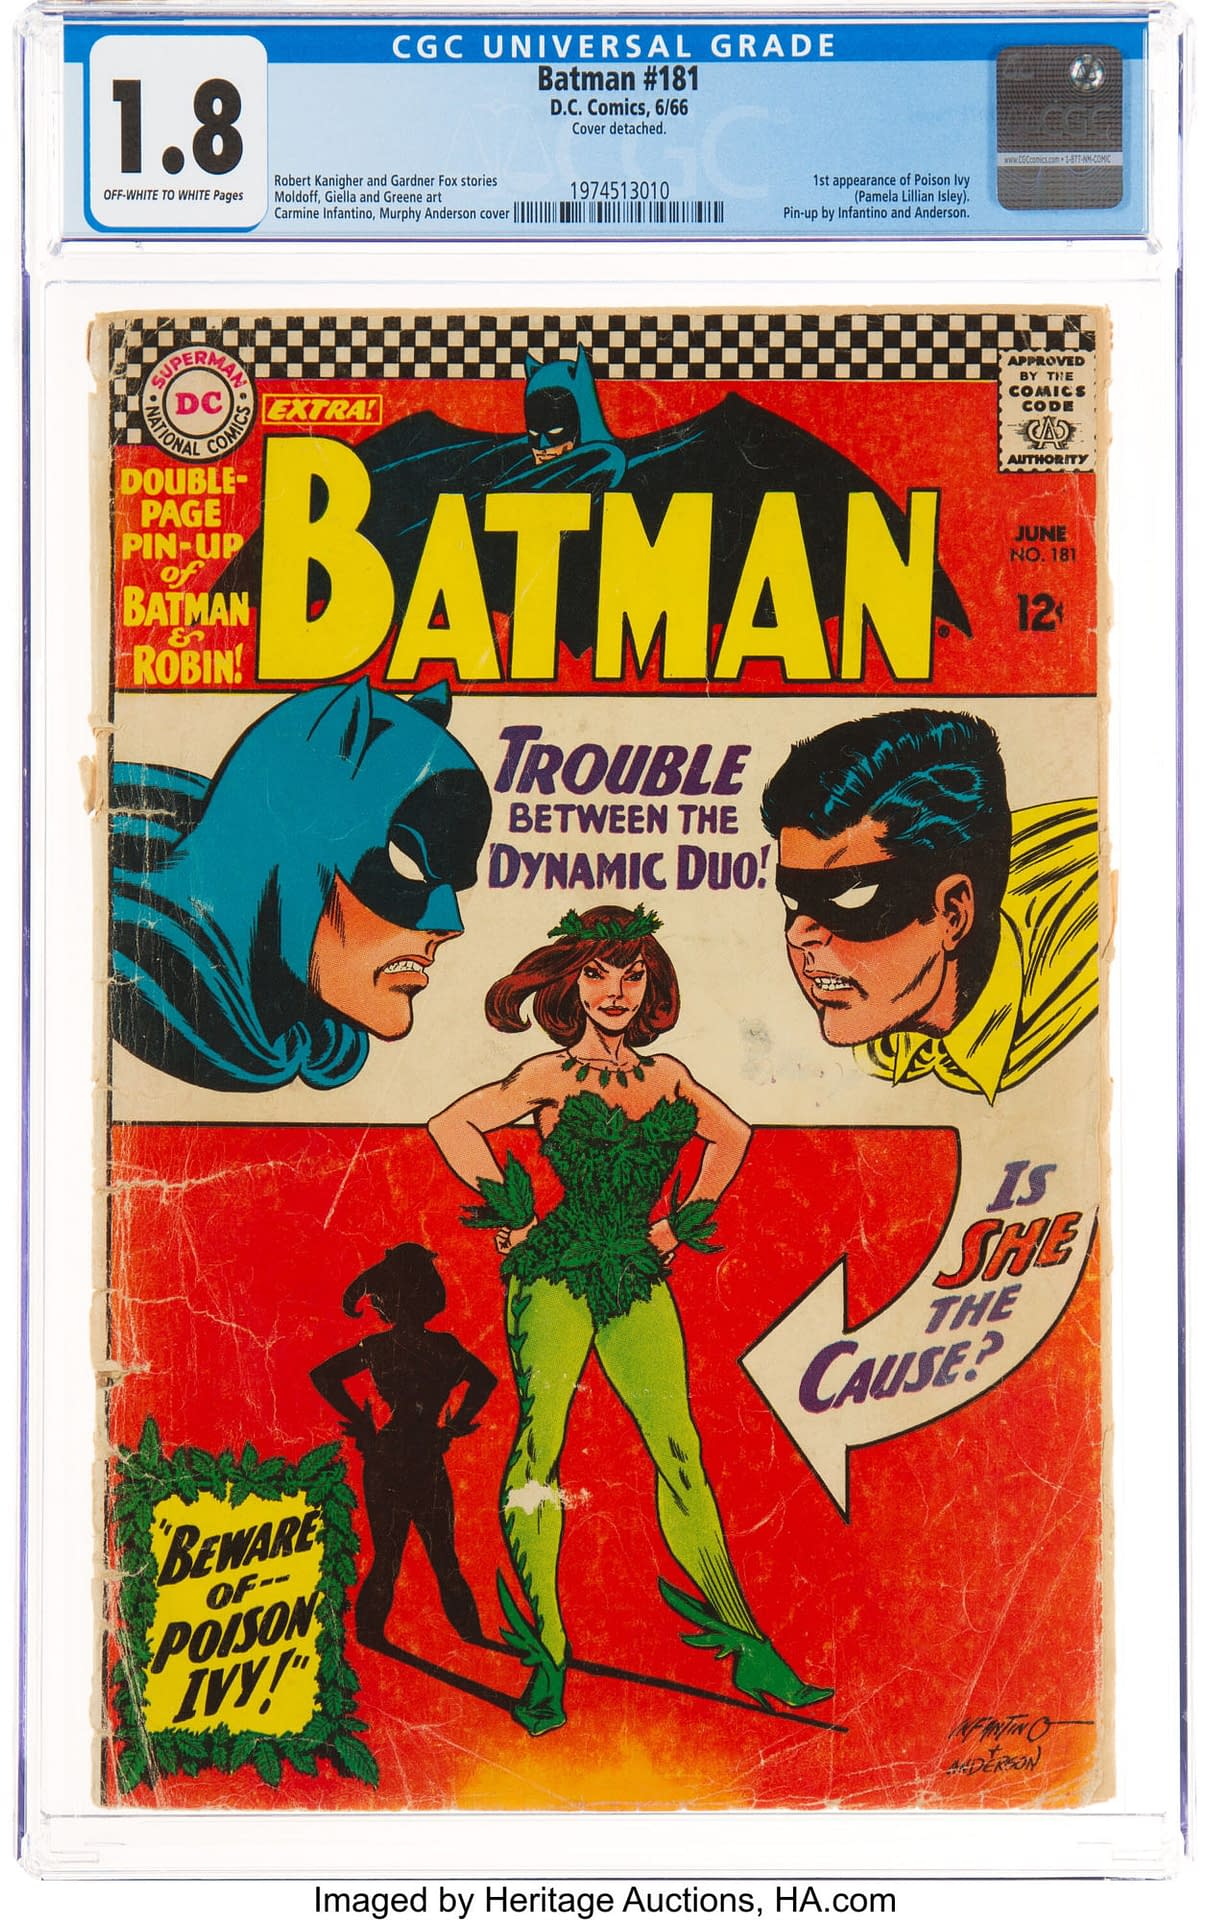 The Pop Art Origins of Poison Ivy in Batman #181, Up for Auction